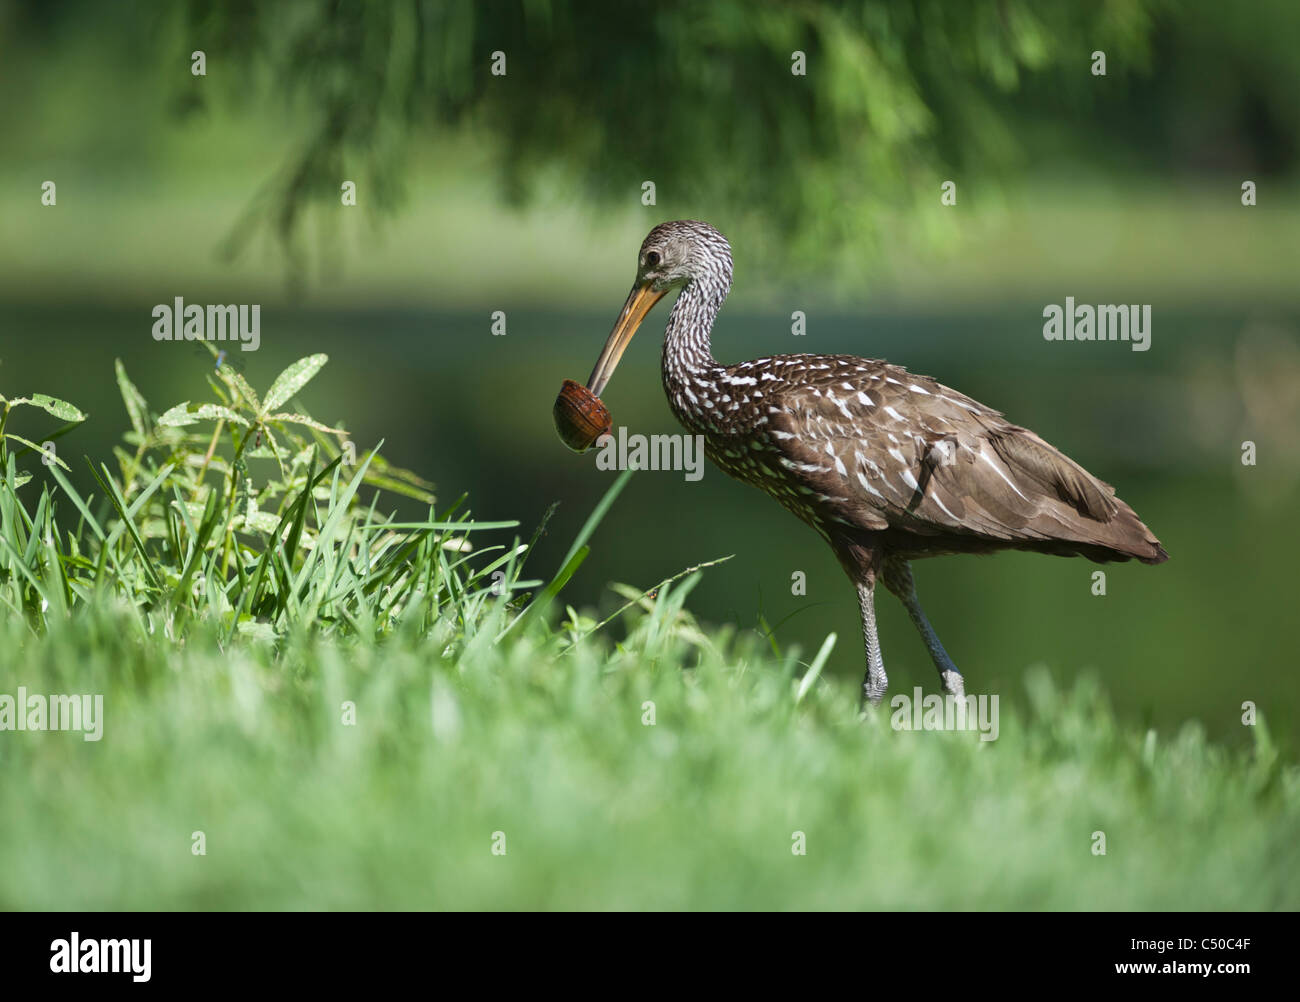 A Limpkin carrying a apple snail along the banks of Lake Griffin in Leesburg, Florida USA Stock Photo